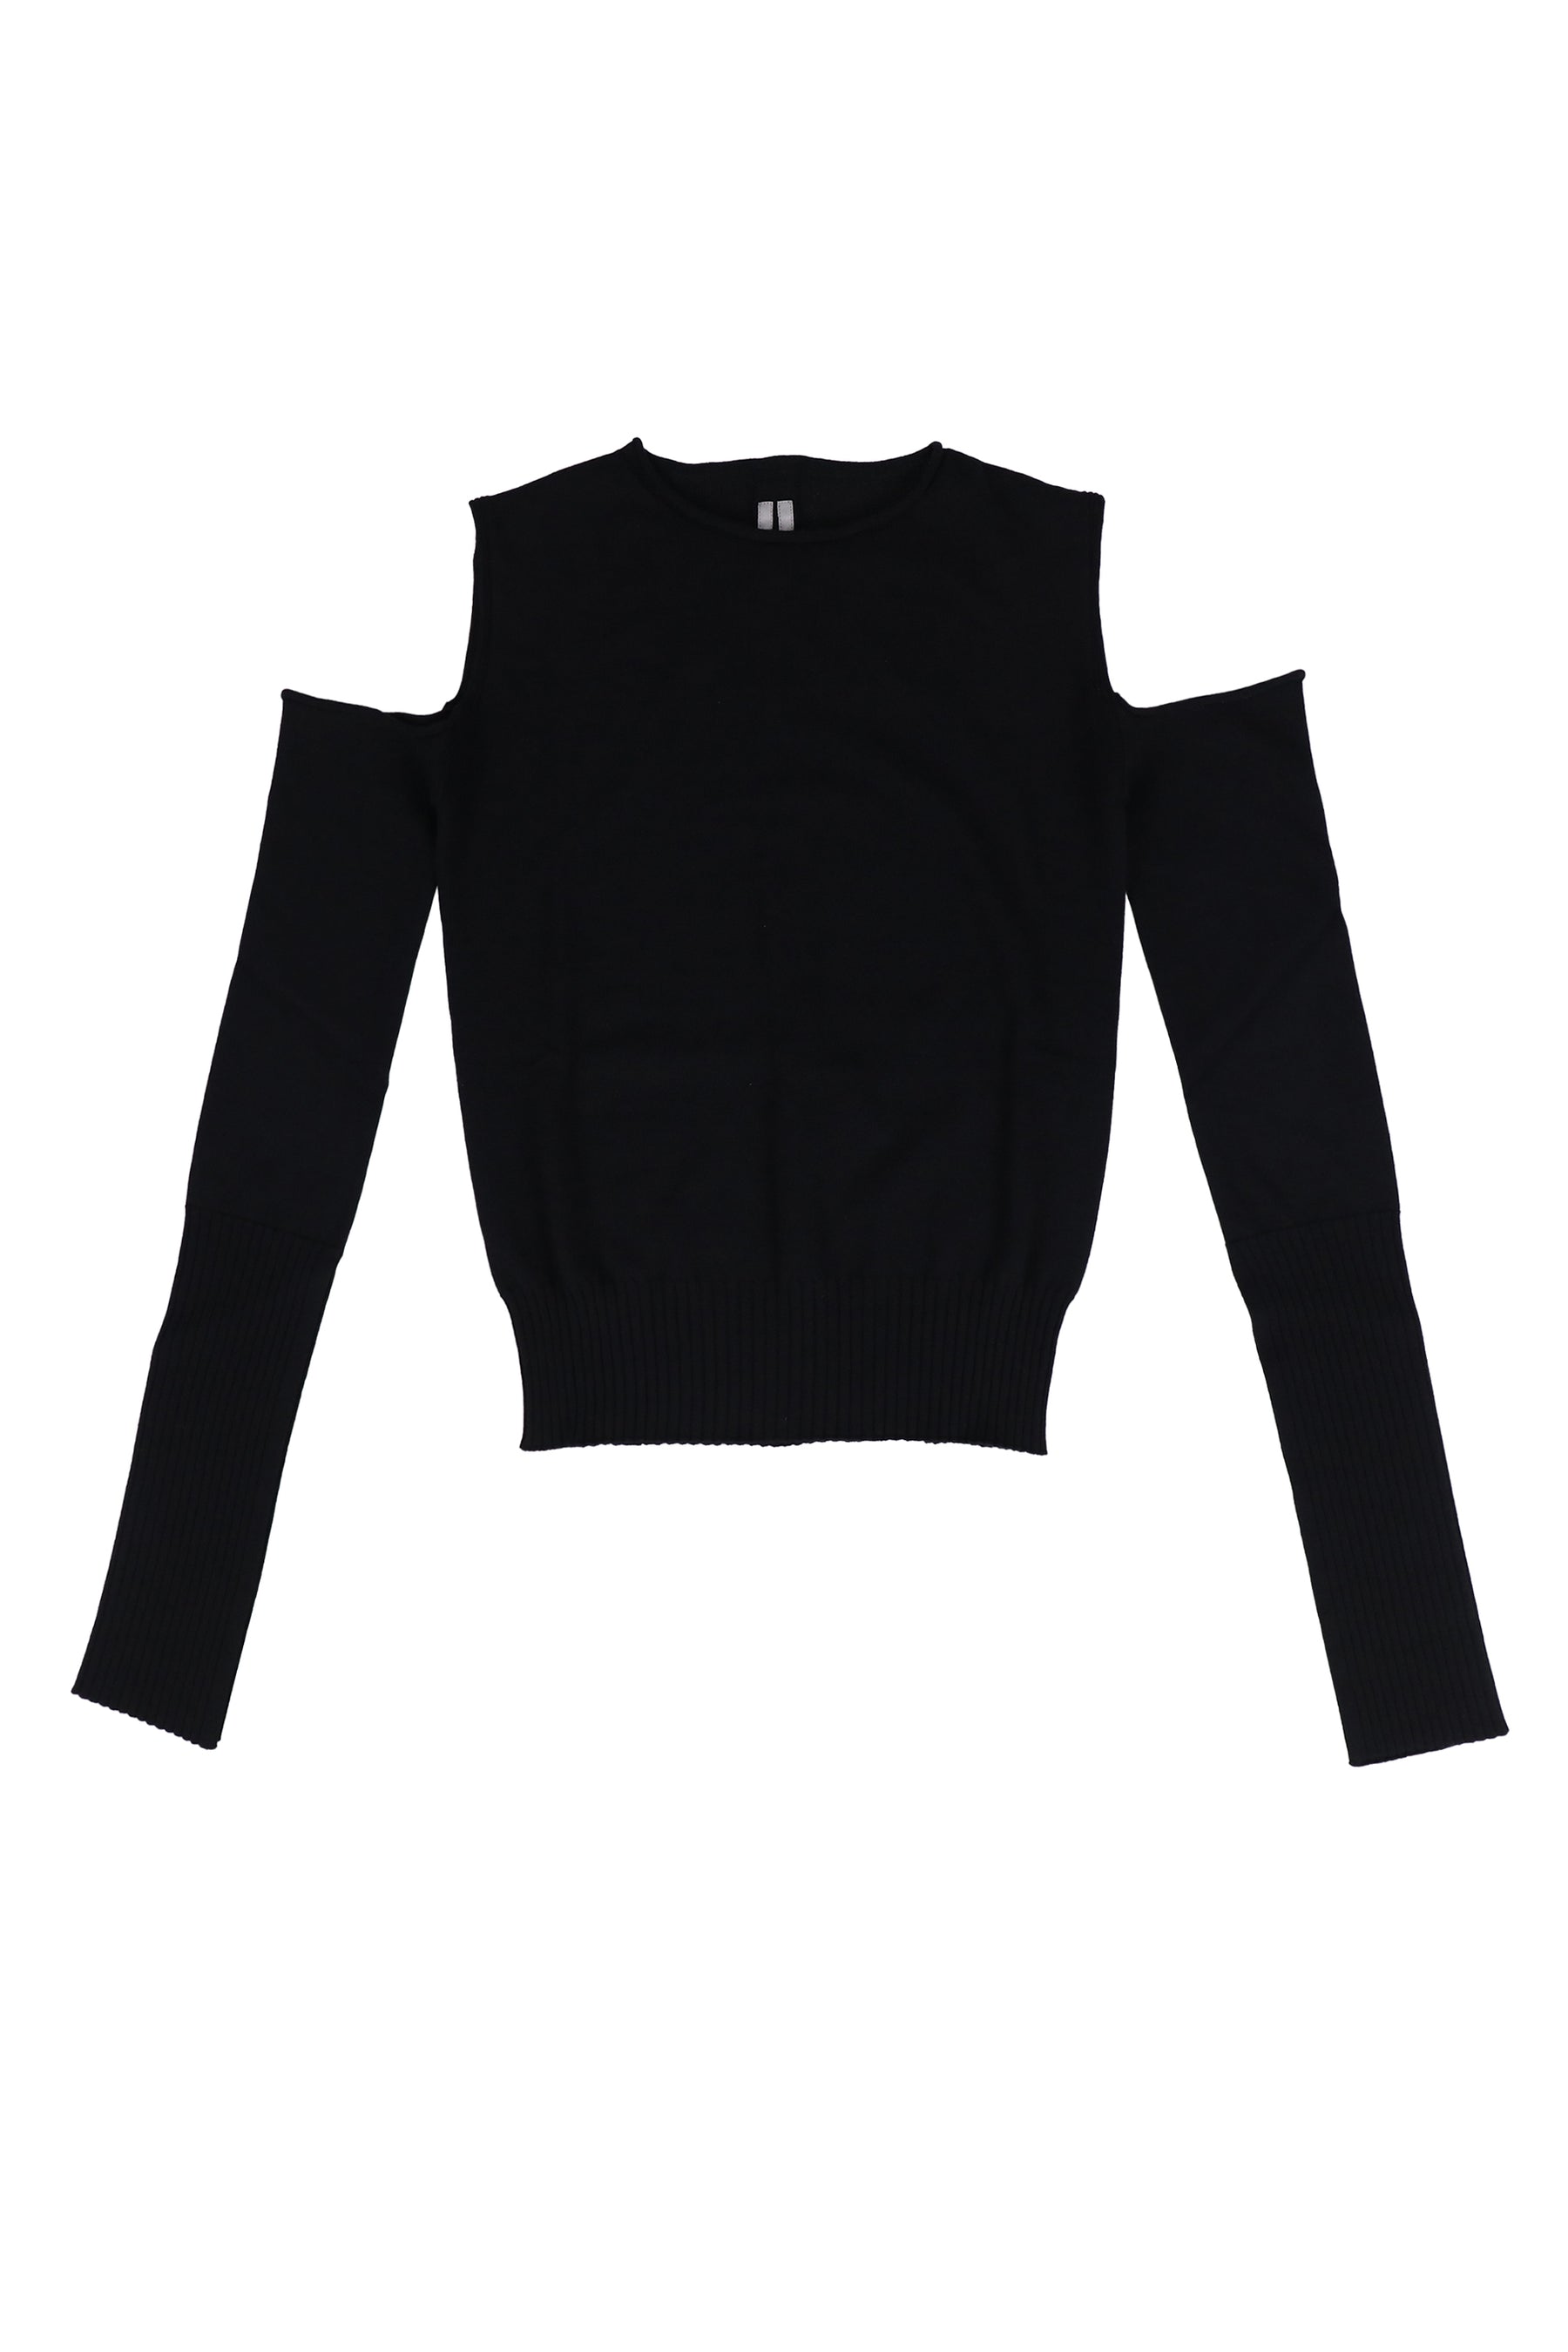 CAPE SLEEVE KNIT / BLK